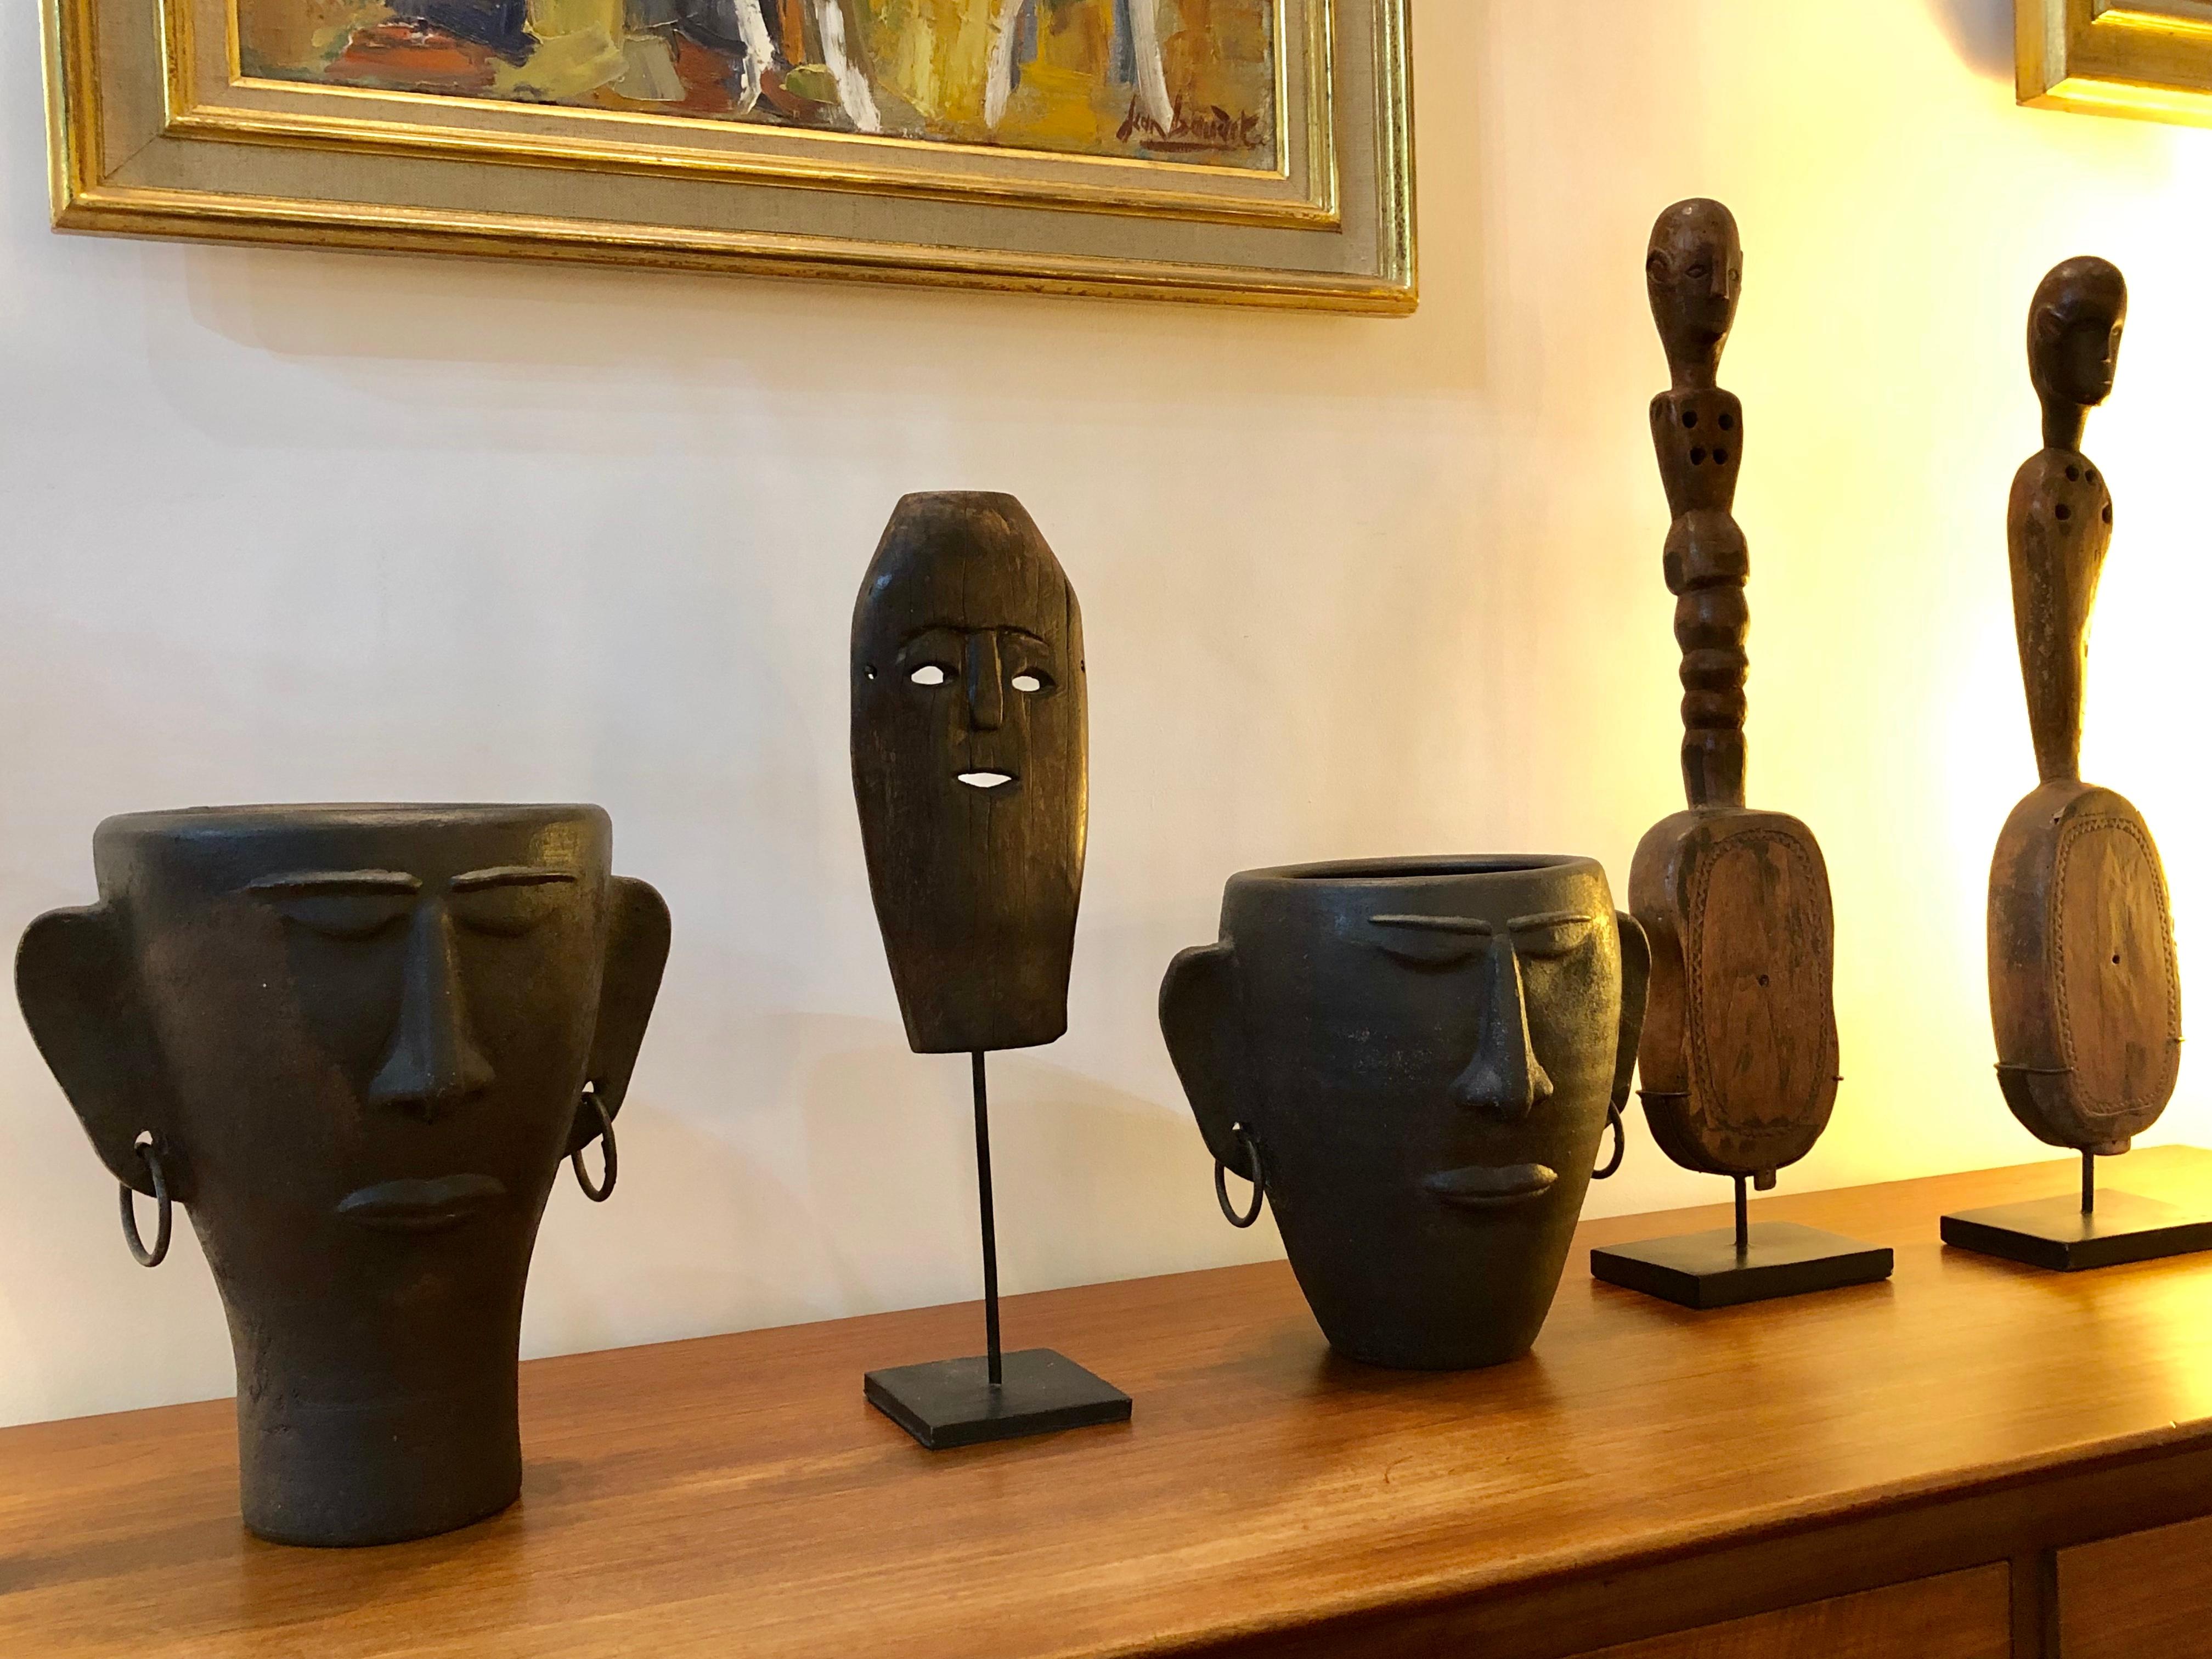 Timor Island sculpted wooden traditional mask (early 20th century) on contemporary metal stand. This is a traditional mask of a figure with male facial features and two holes as eyes and another for the mouth. The island of Timor gave rise to a